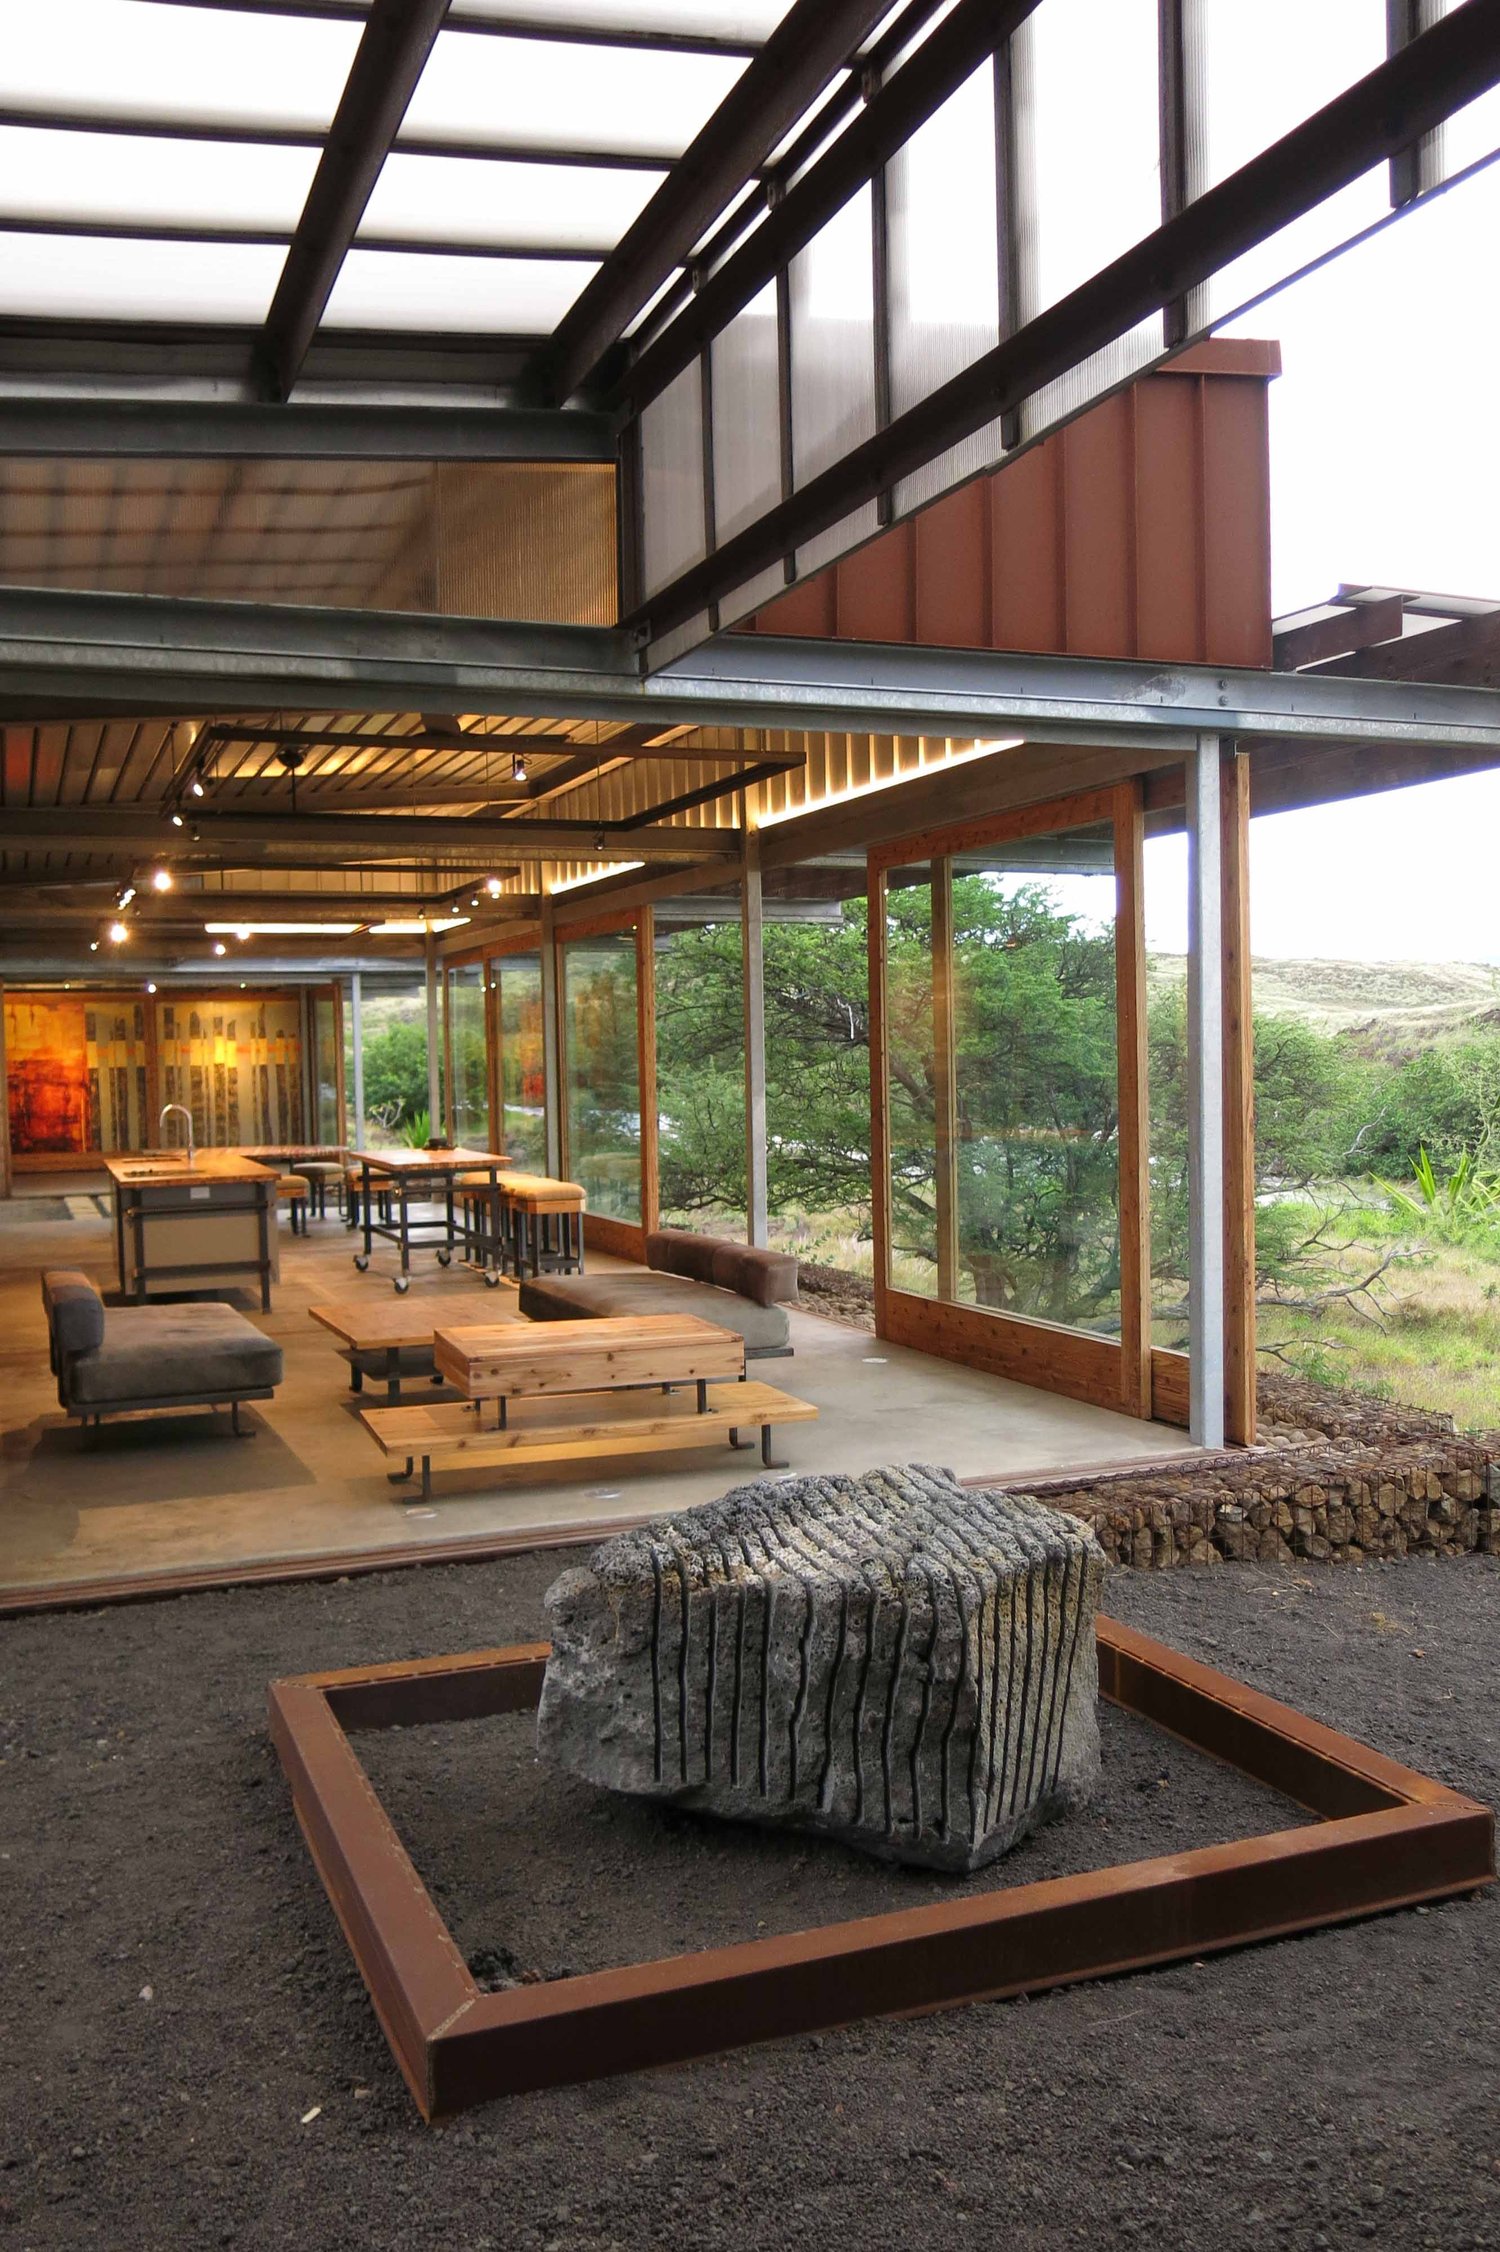 With sliding wall/window panels open, the indoor spaces can be opened to the surrounding landscape. | John Russell